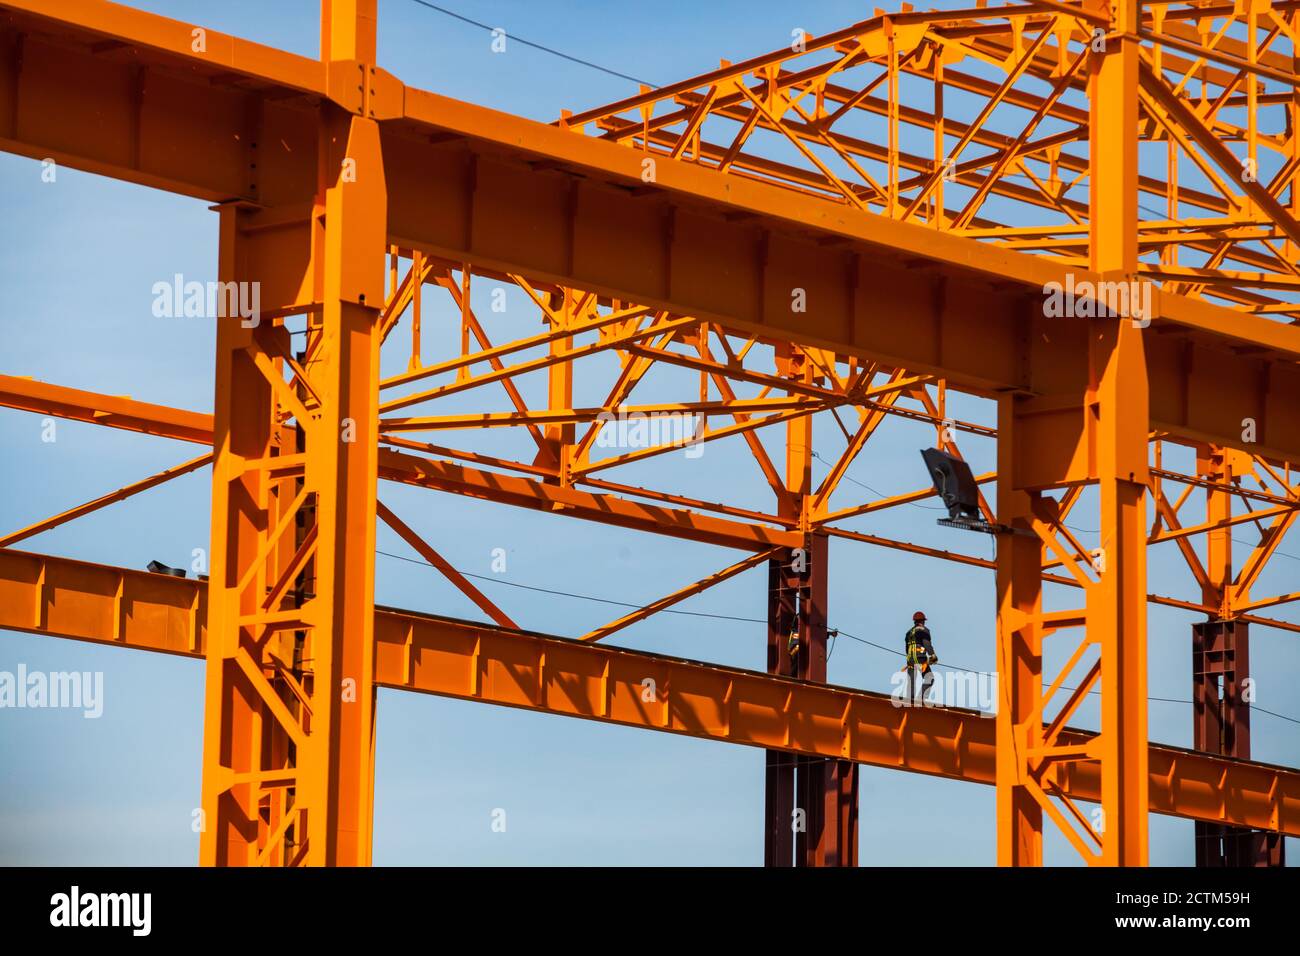 Kostanay/Kazakhstan - May 14 2012: Construction of new factory building. Assembling orange steel building structure. High-altitude worker (industrial Stock Photo